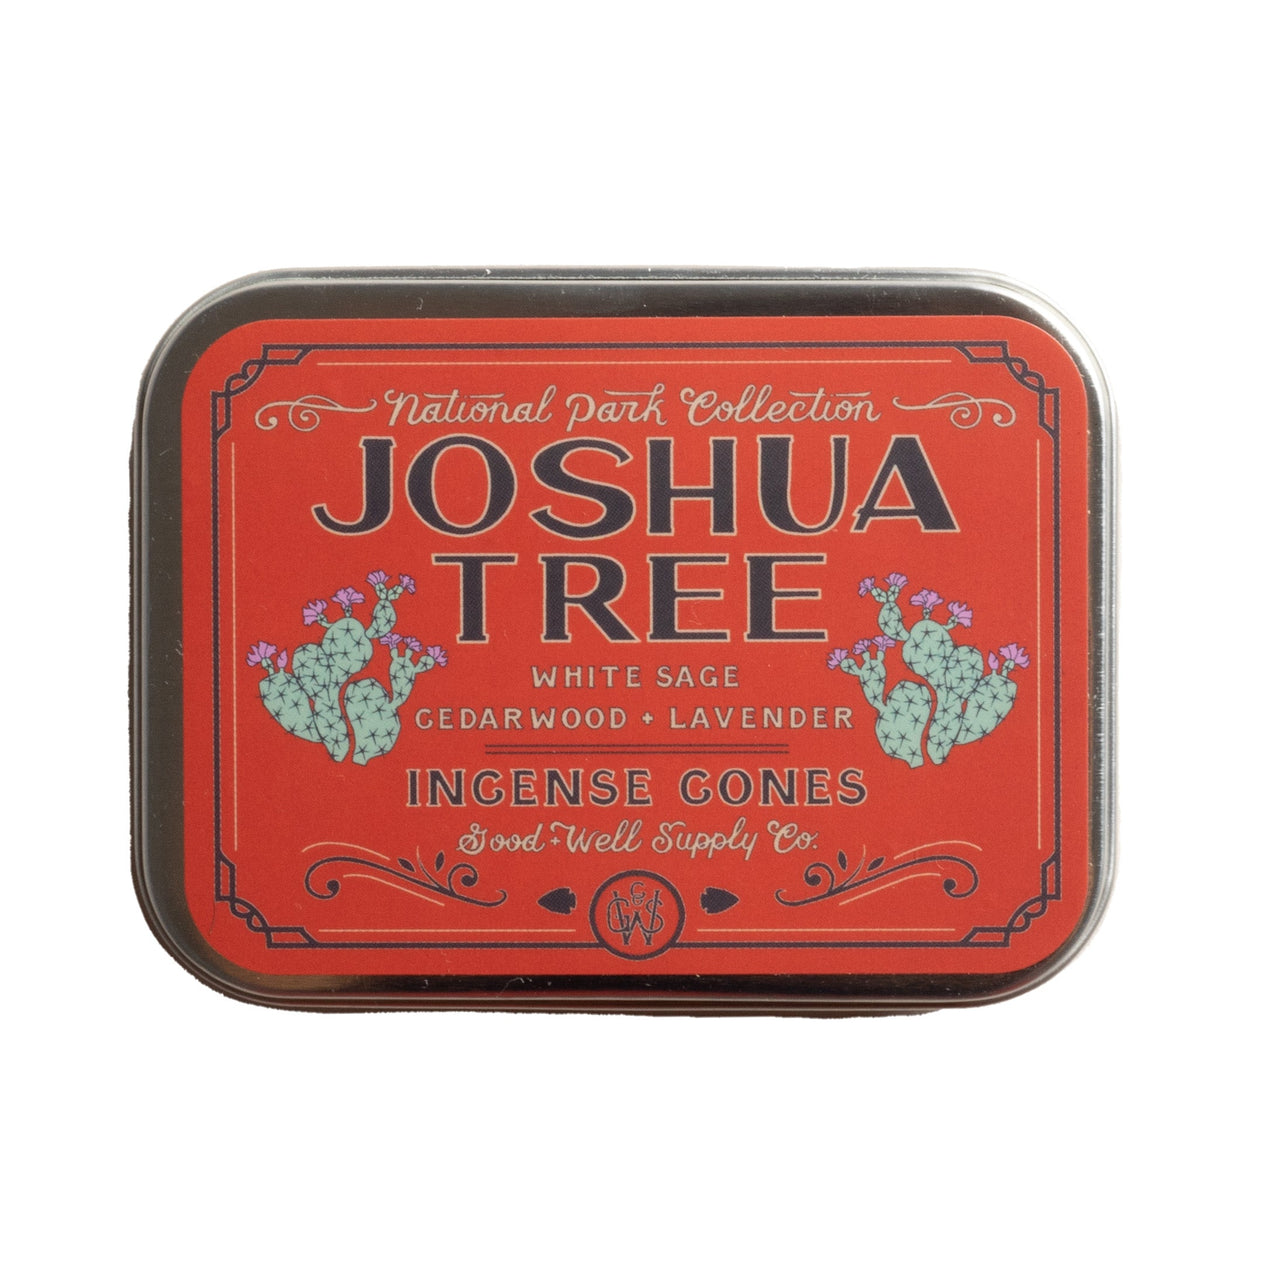 Good & Well Supply Co 'Joshua Tree' Incense Cones-Incense-Clutch Cafe